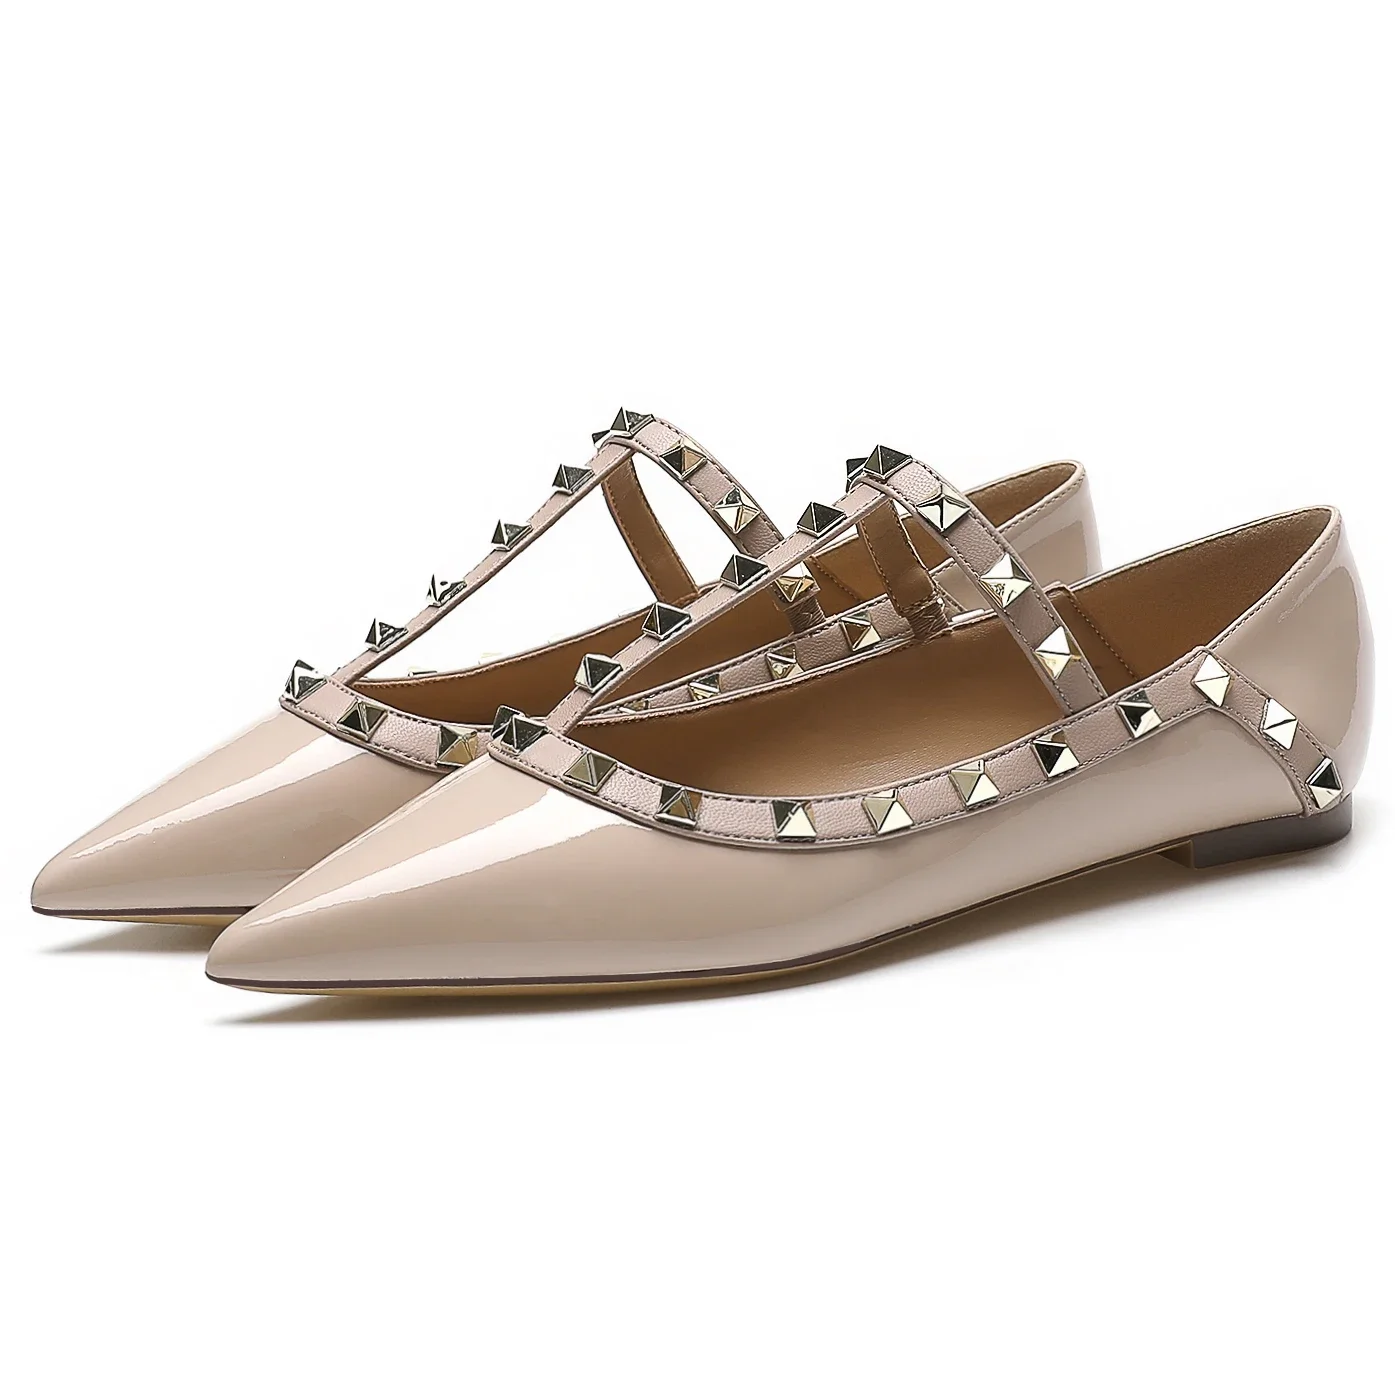 

【Measure your feet length before order】Luxry Designer Women Ballet Flat Pump Rivet T Strap Pointy Toe Party Dress Shoe 97-CHC-33